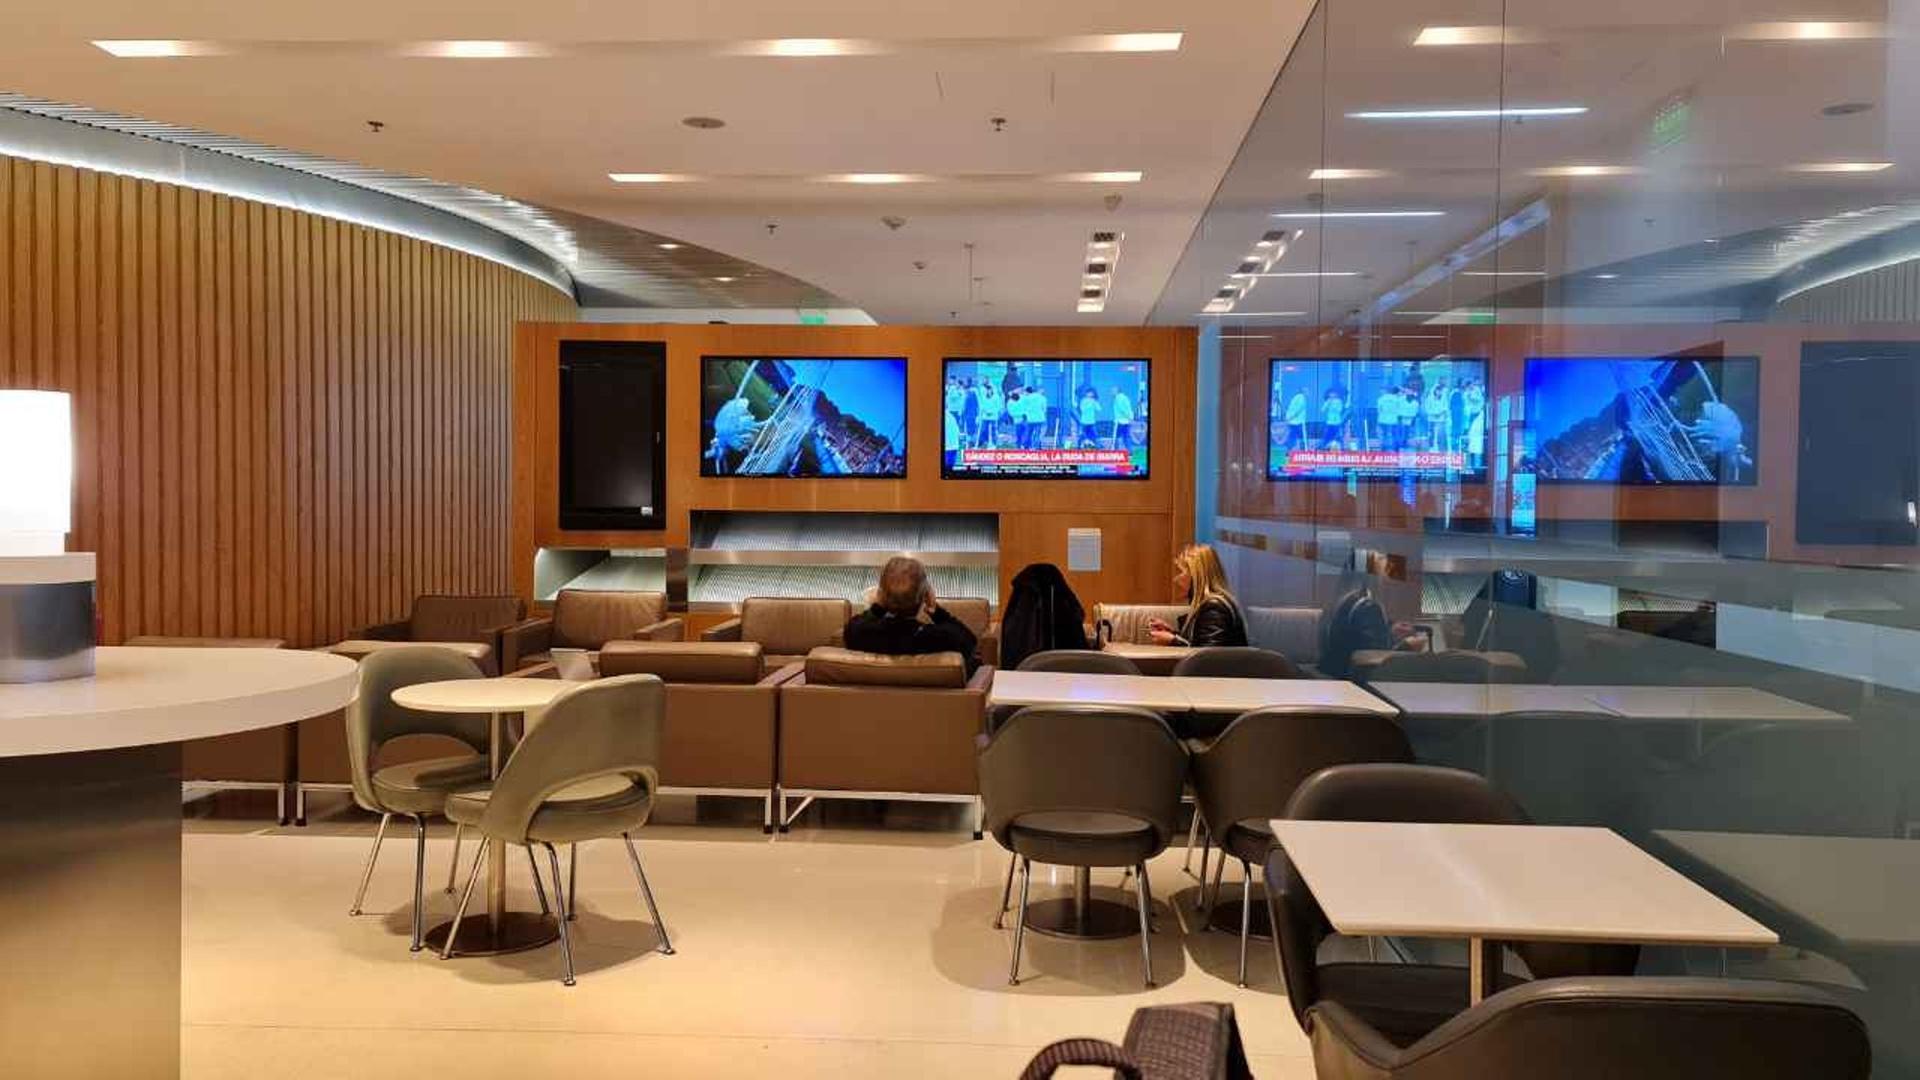 American Airlines Admirals Club & Iberia VIP Lounge image 18 of 18